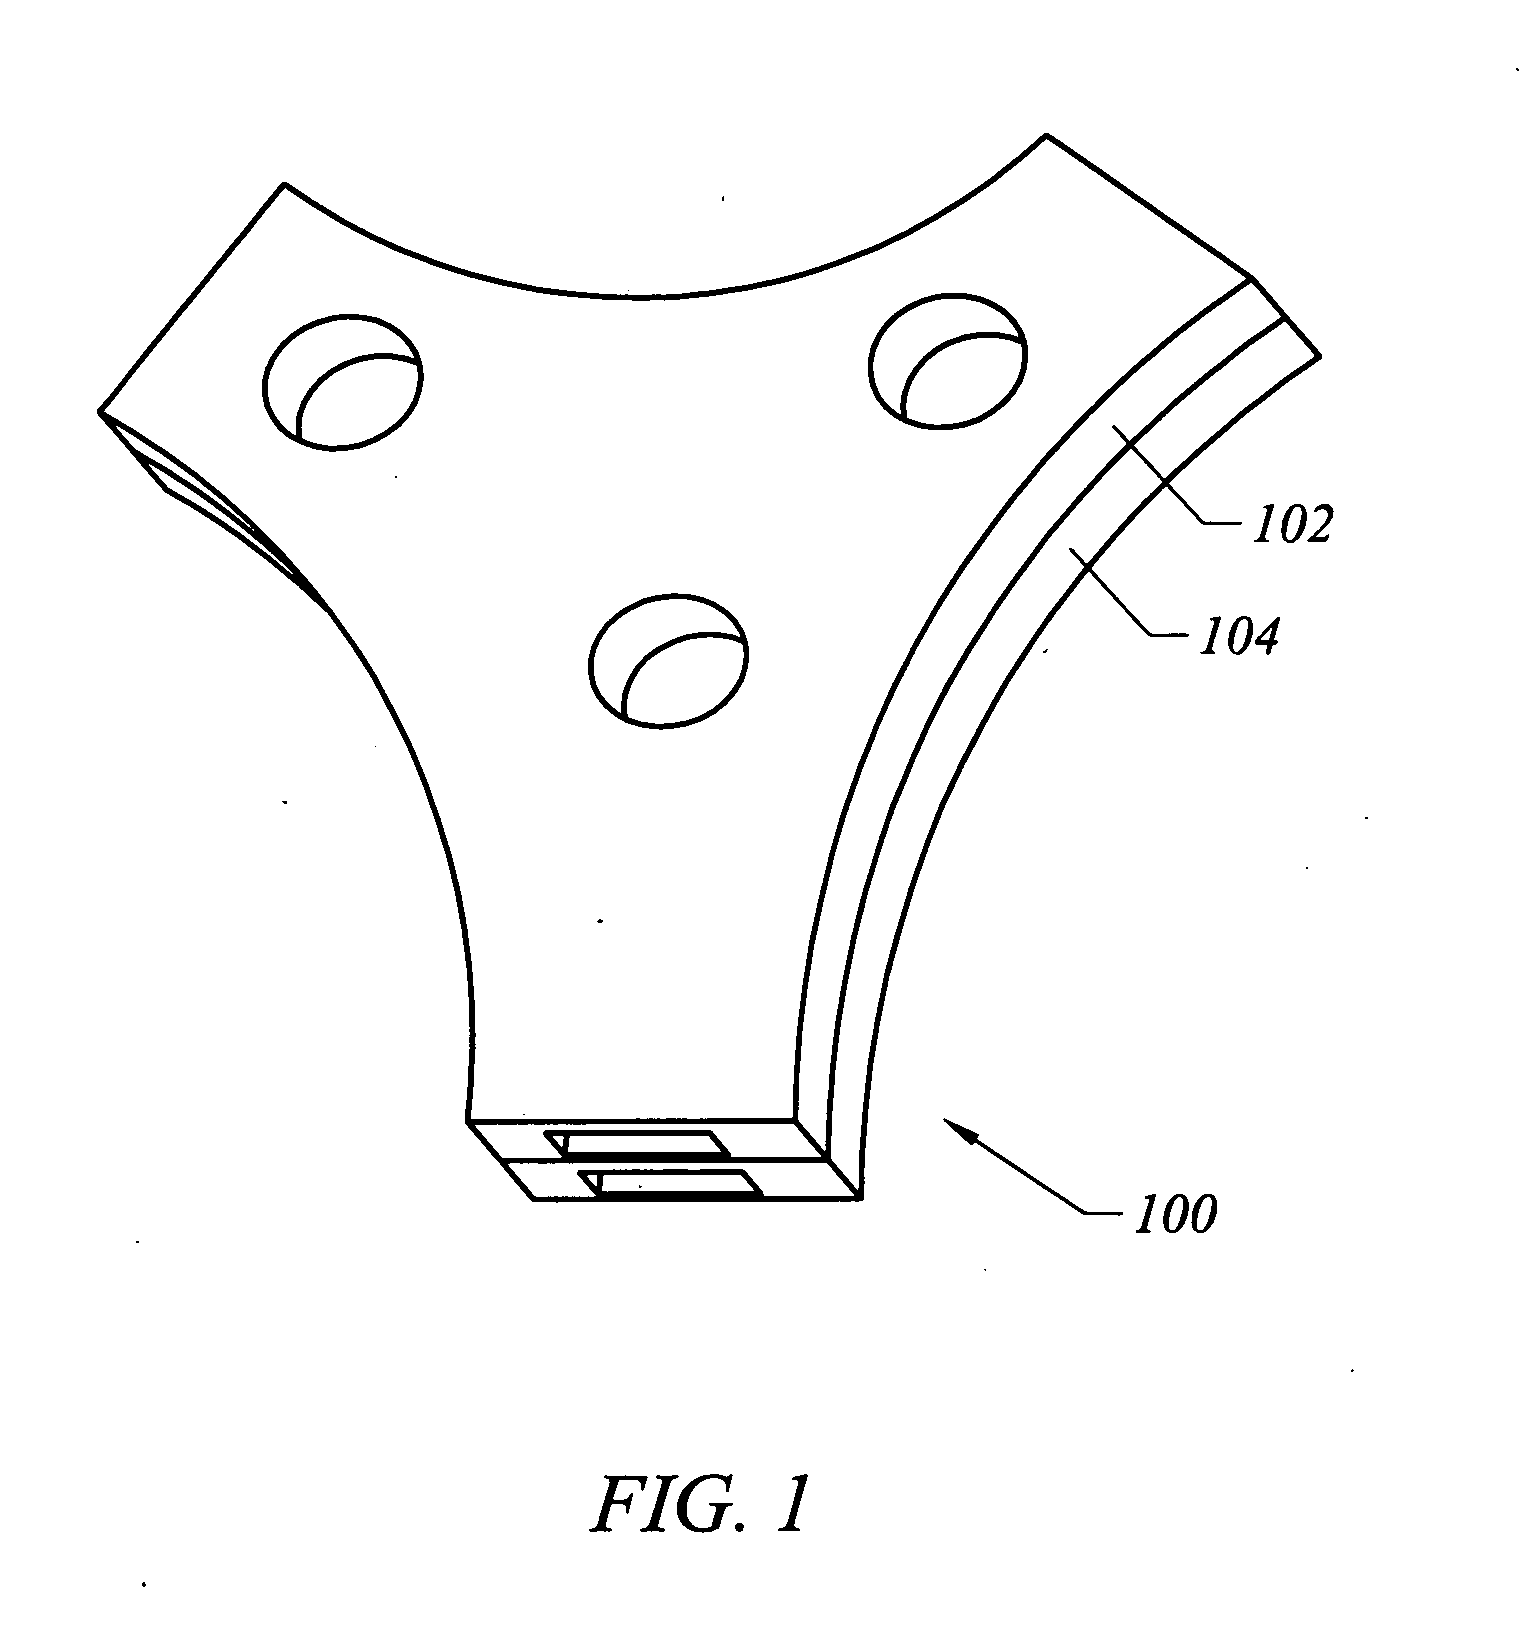 Apparatus and method for electrically and mechanically connecting and disconnecting a power line